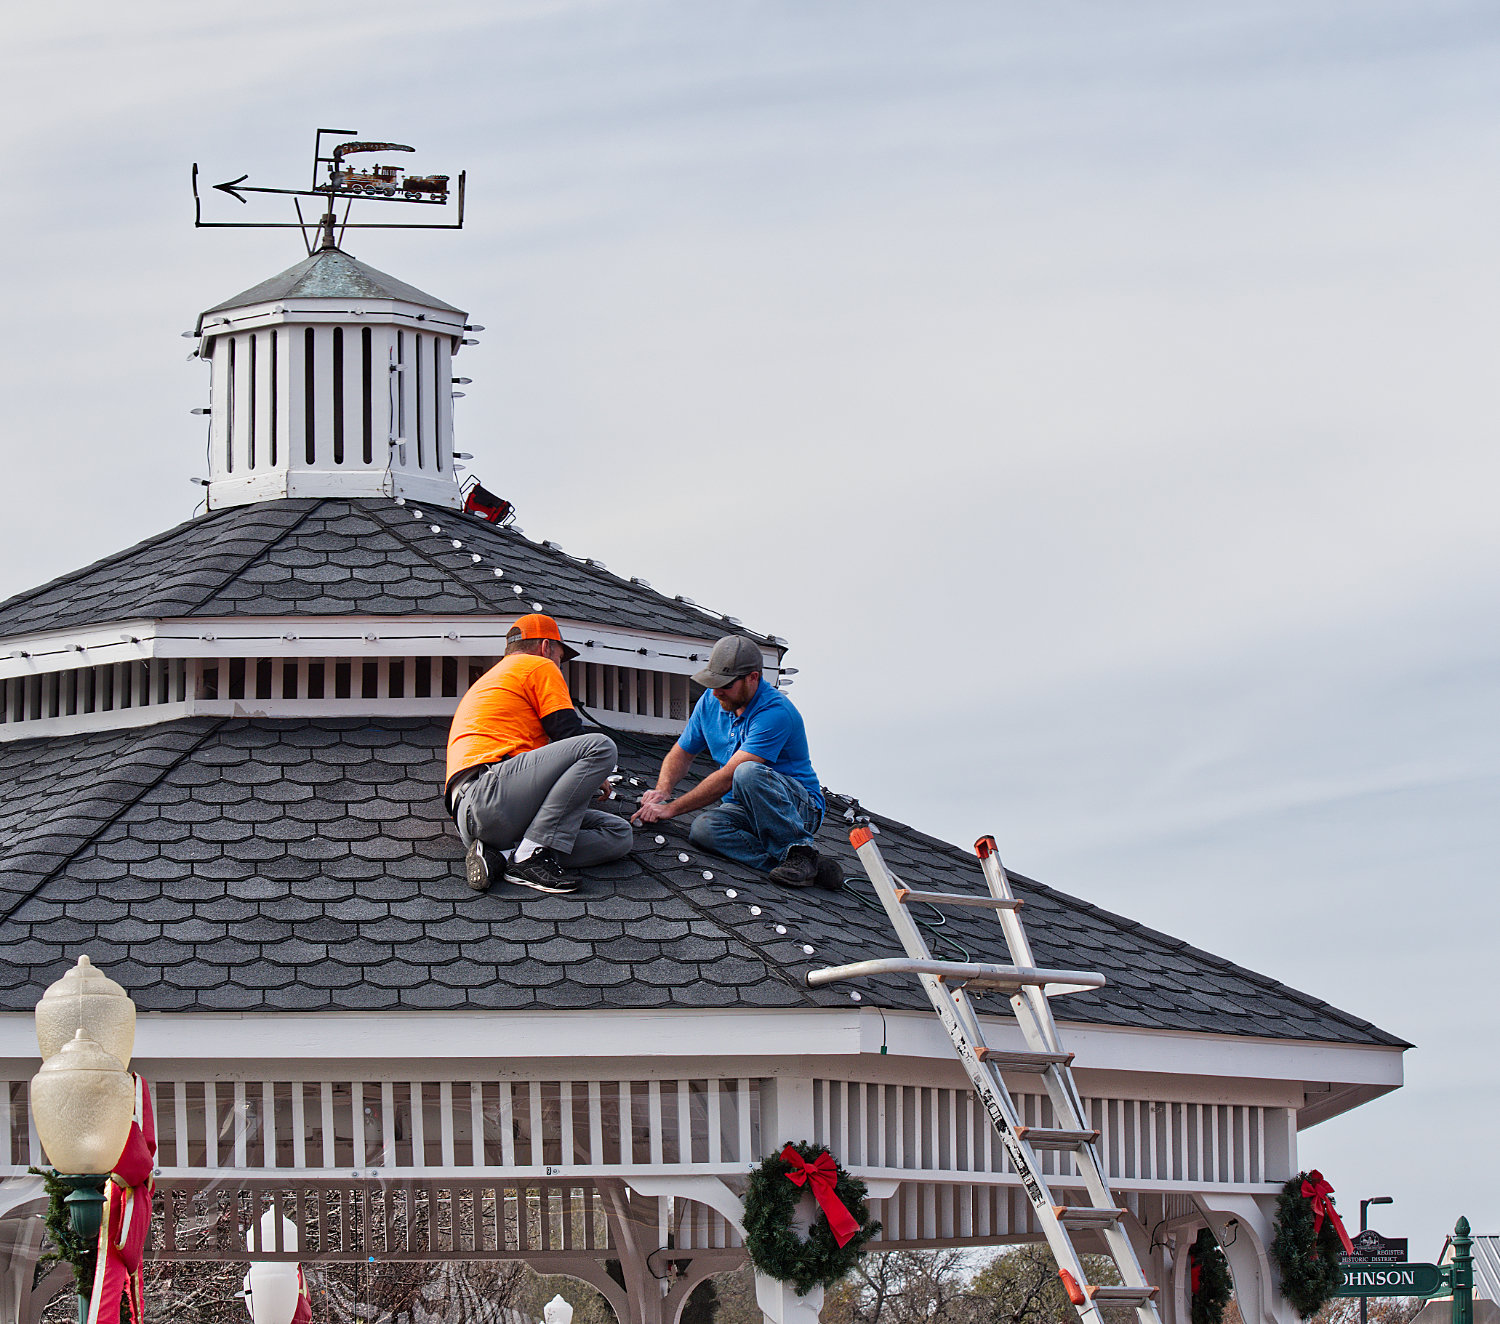 Loyd Hughui (in orange) and Adam Thurman on Thursday string lights along the roof of the gazebo where Santa is expected to appear in downtown Mineola this weekend.